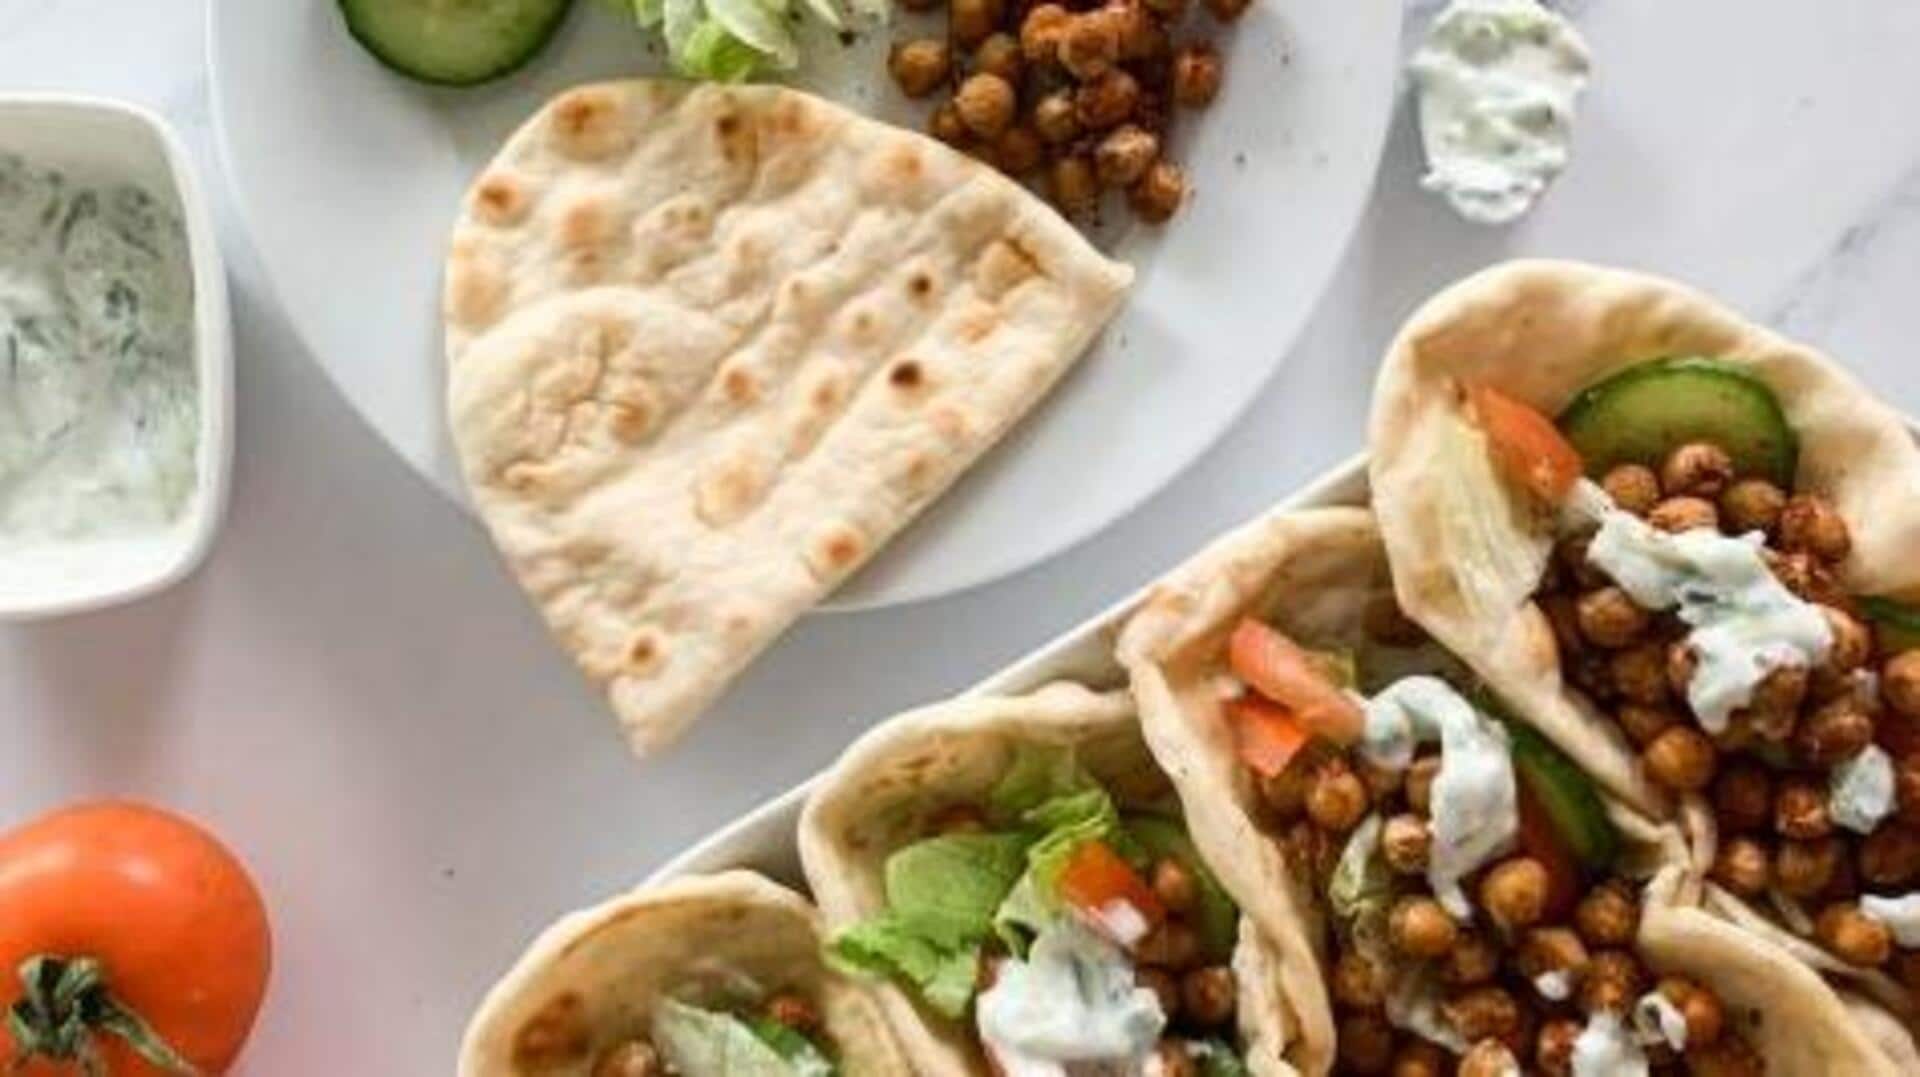 Try this roasted chickpea gyros recipe